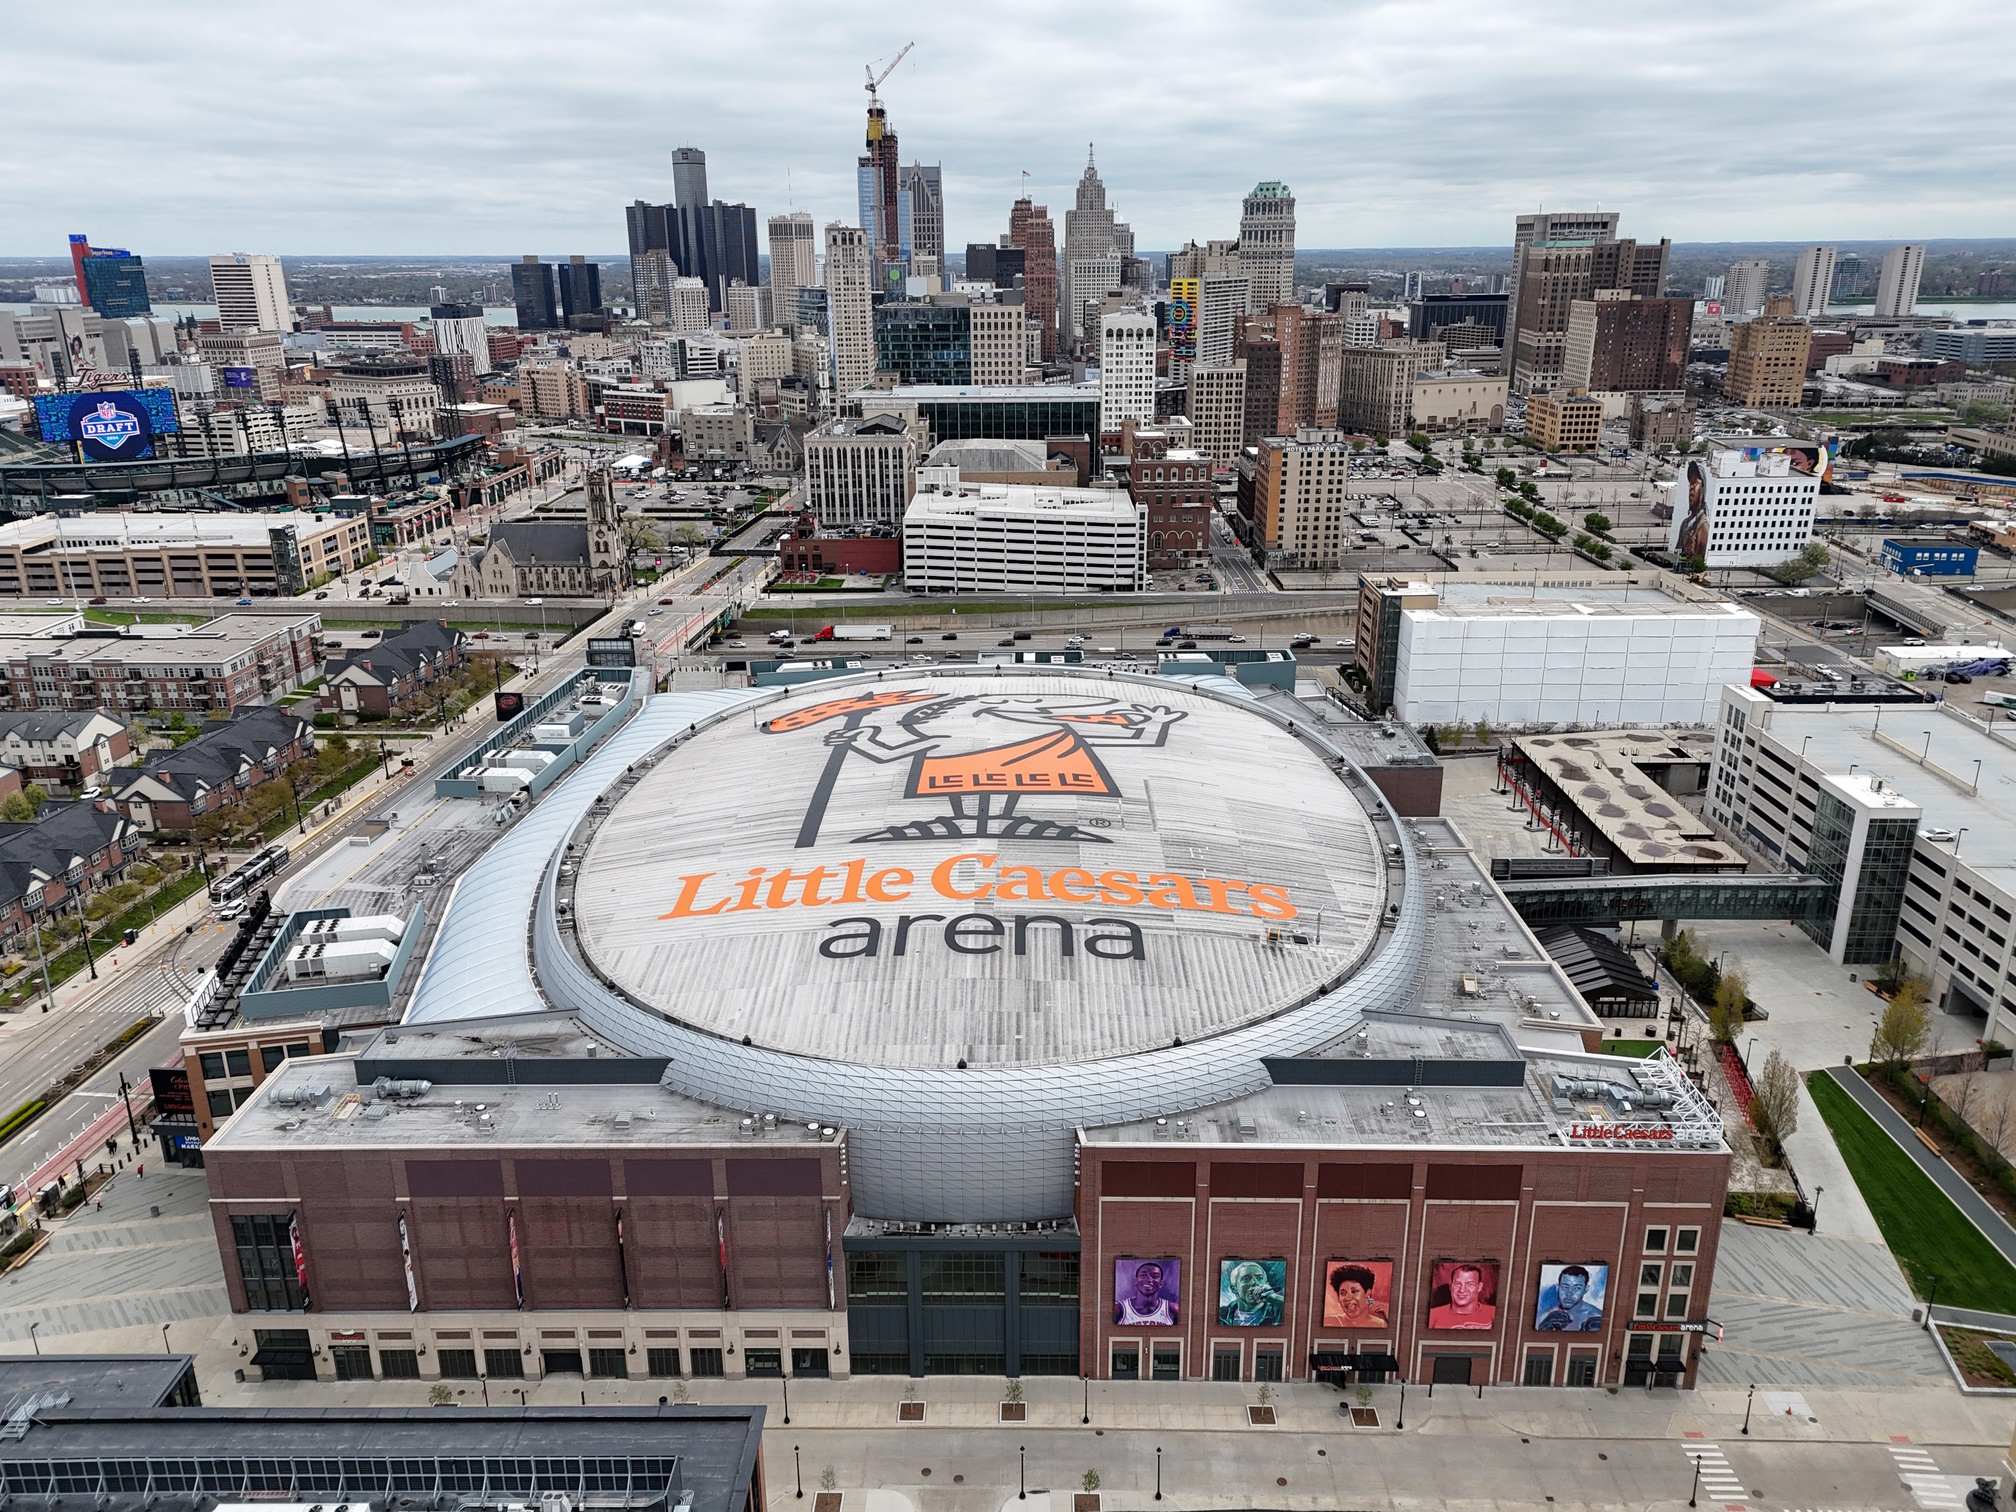 Detroit hasn't hosted an NBA All-Star game since 1979.